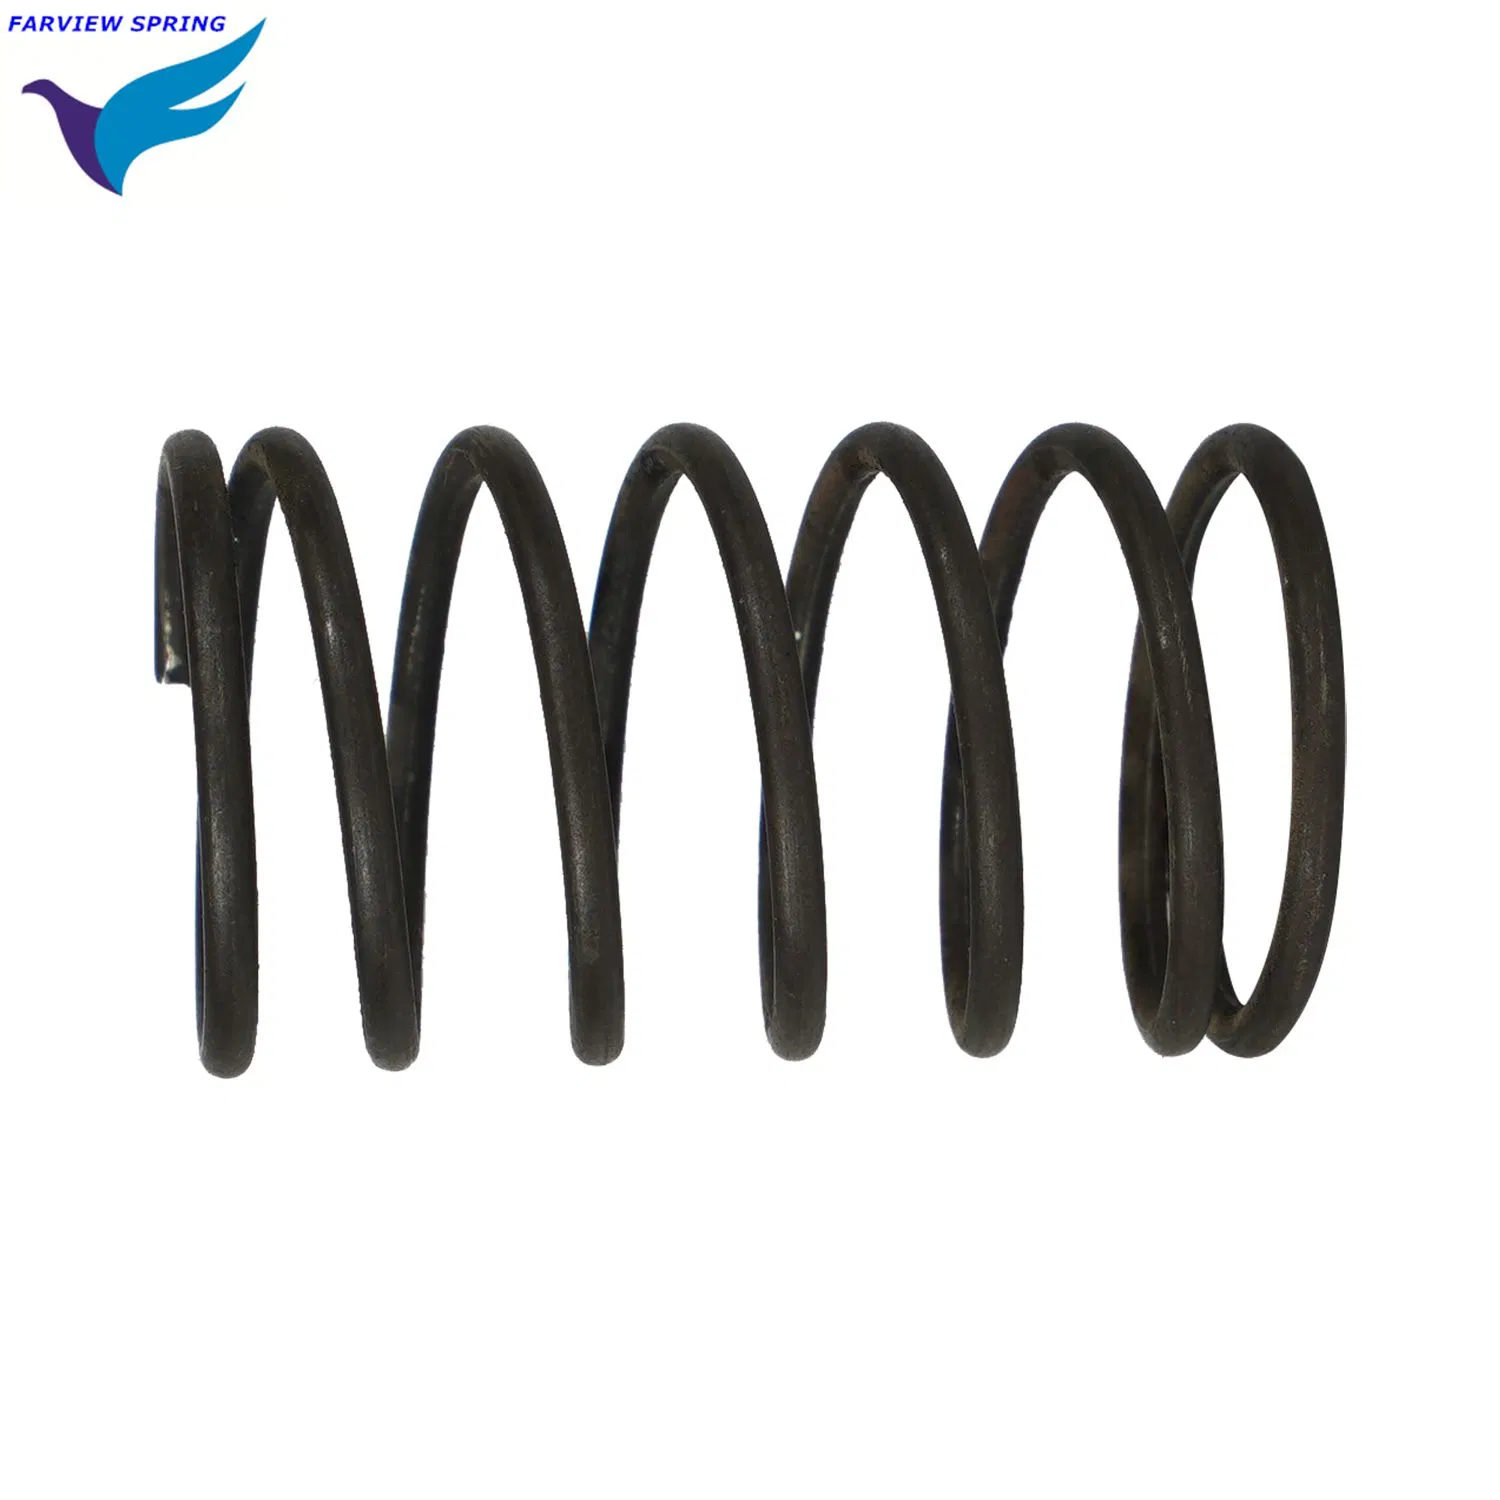 Stainless Steel Special-Shaped Spring Black Zinc Coil Extension Spring Hardware Fastener Hot Sale High quality/High cost performance 